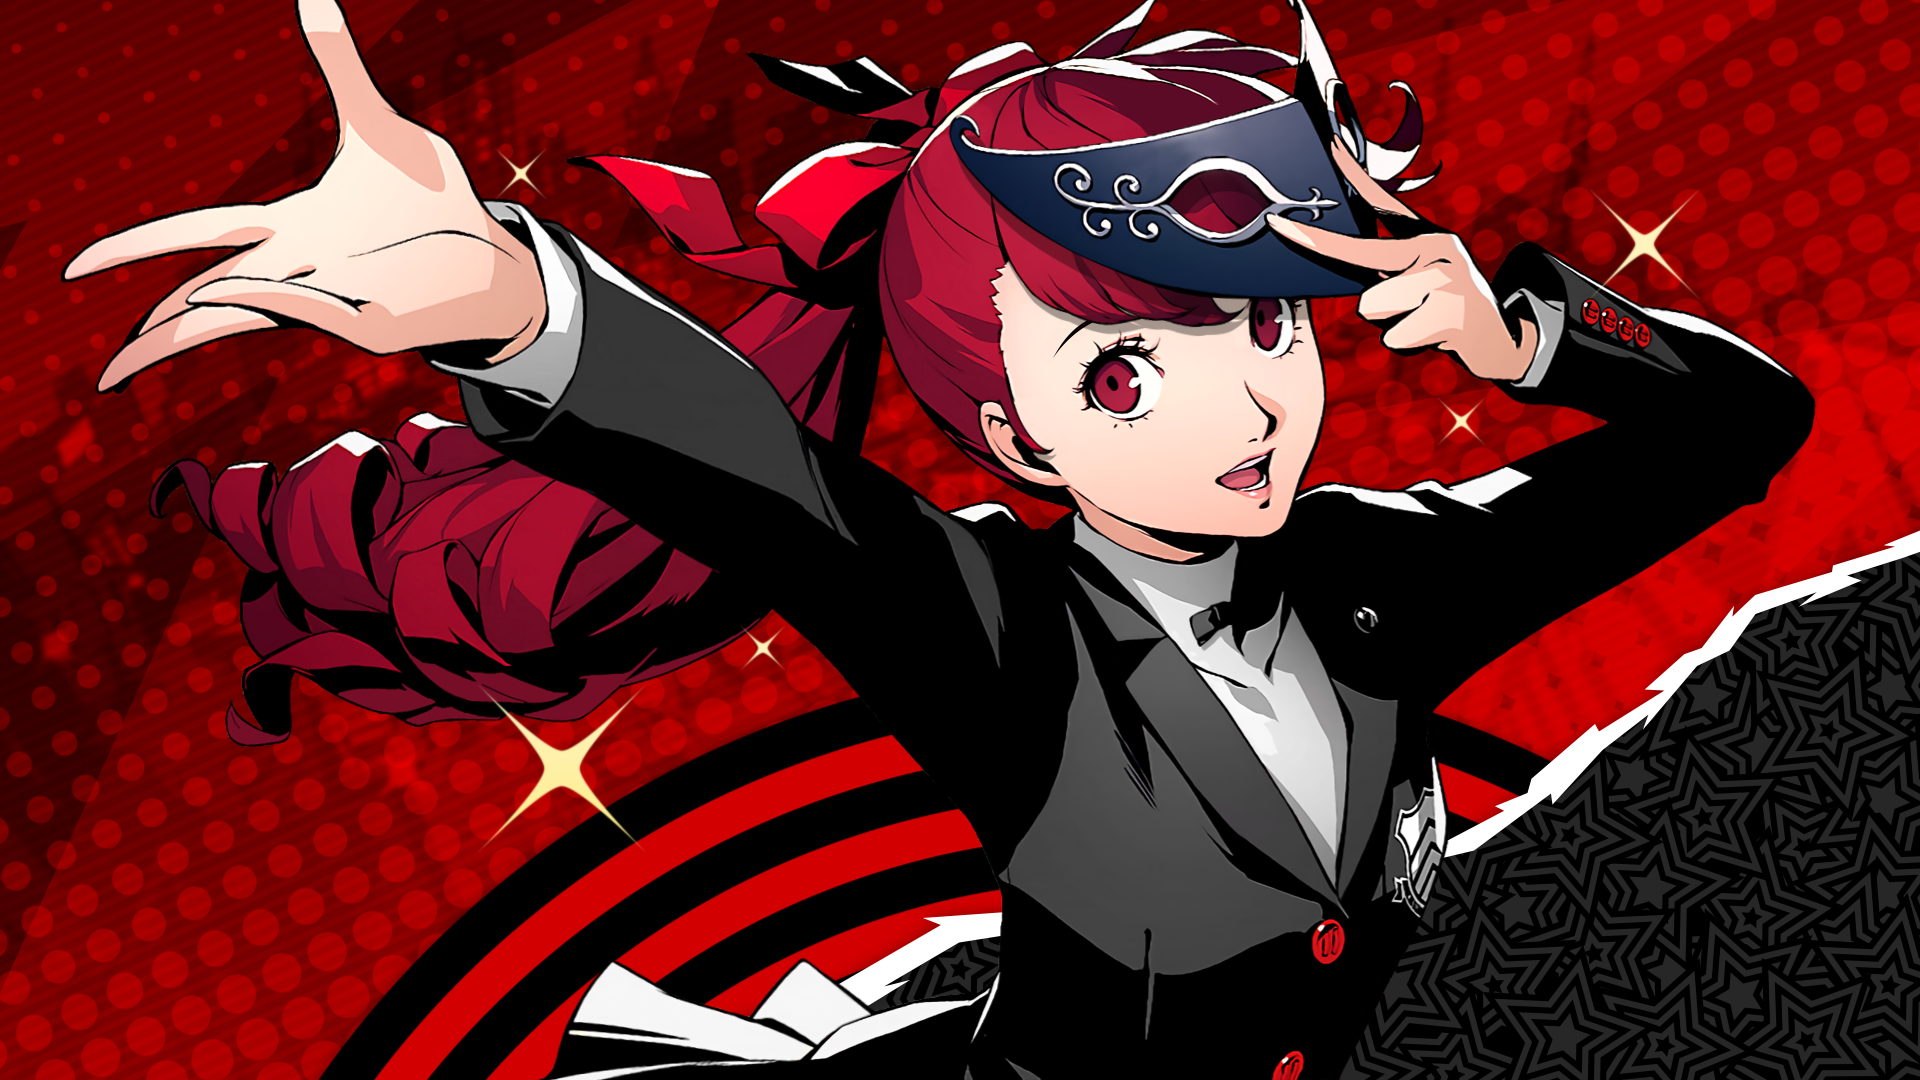 Super excited for P5R next month, so I made an animated Kasumi desktop wallpaper for Wallpaper Engine